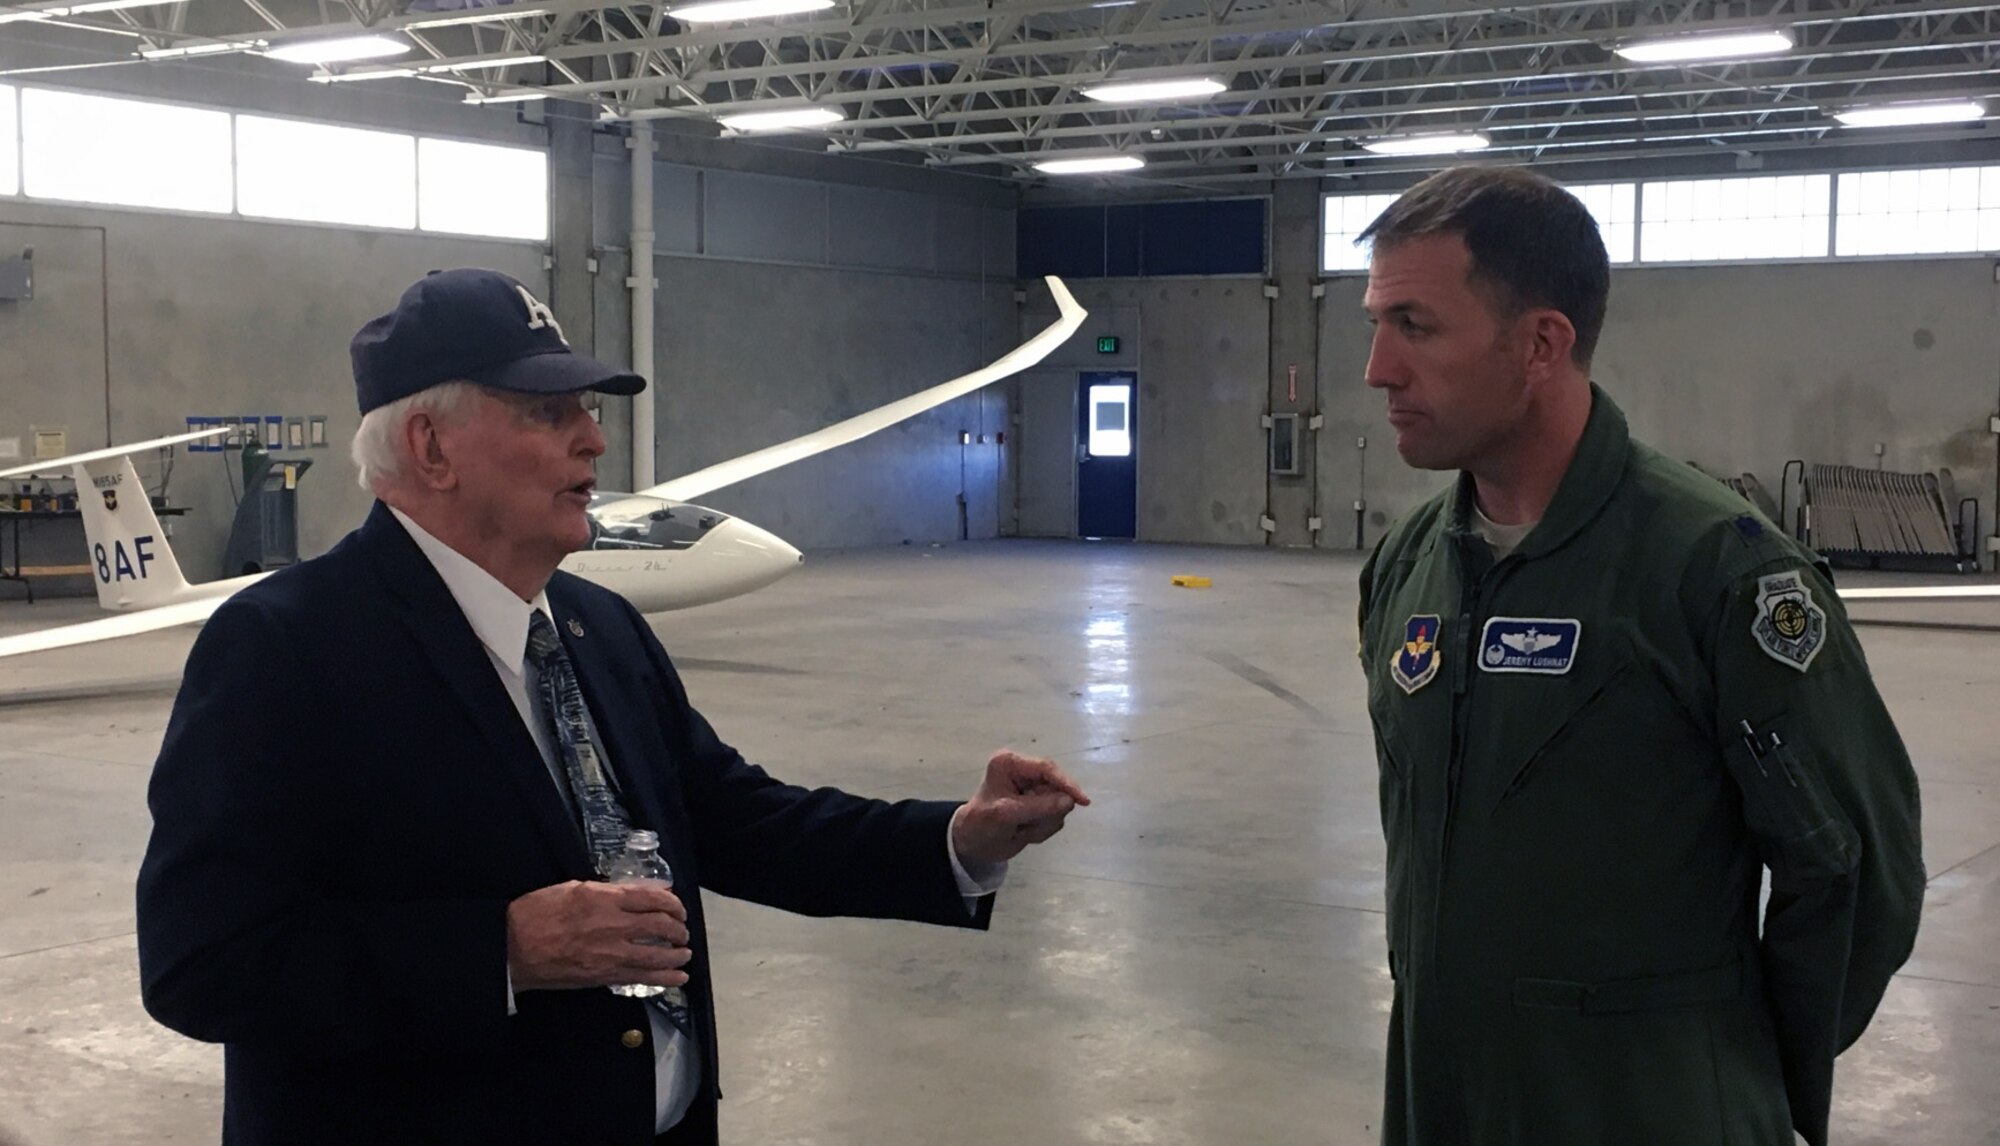 Retired Lt. Col. James Leland chats with Lt. Col. Jeremy Lushnat, commander of the 94th Flying Training Squadron, during his fall 2016 visit to the U.S. Air Force Academy. Leland assisted with the design of the airfield and the Academy's Airmanship Program the early 1960's. (Courtesy photo)